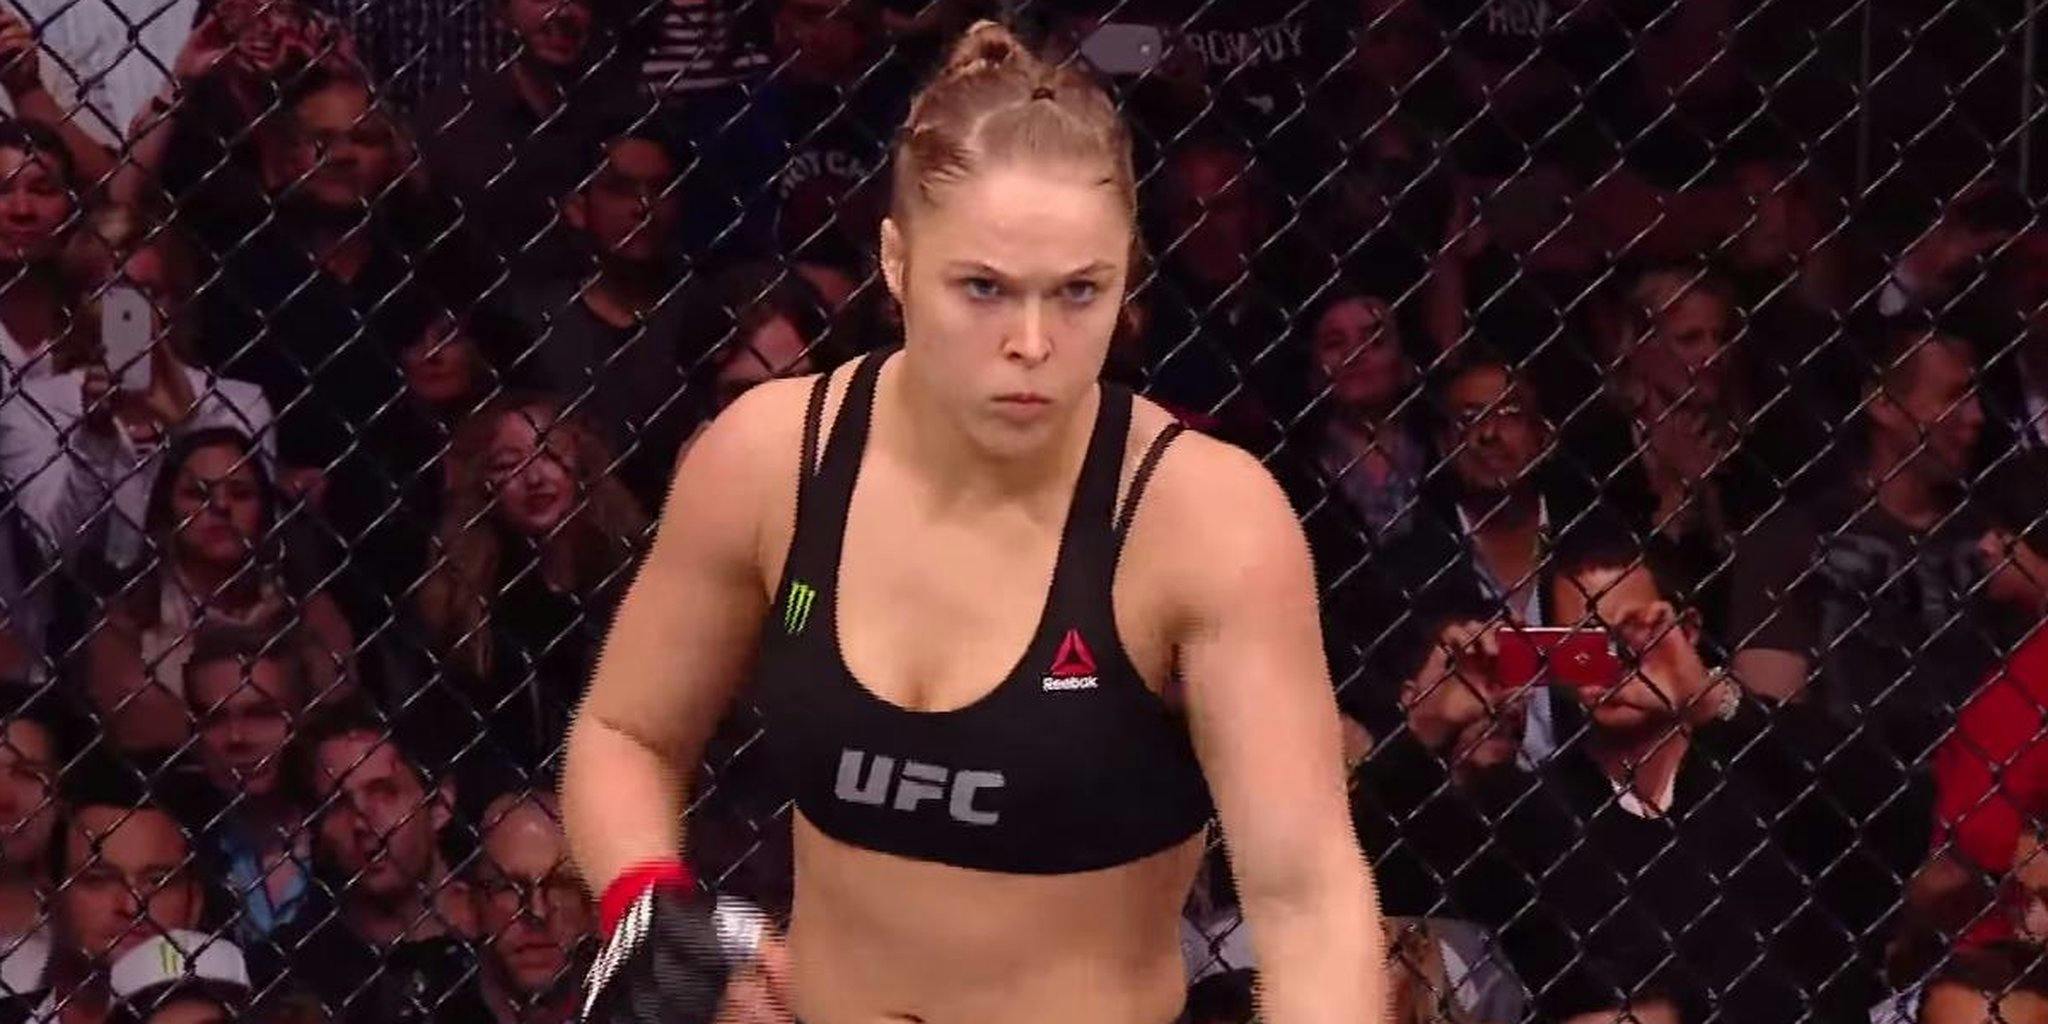 A porn parody of UFC fighter Ronda Rousey is coming soon